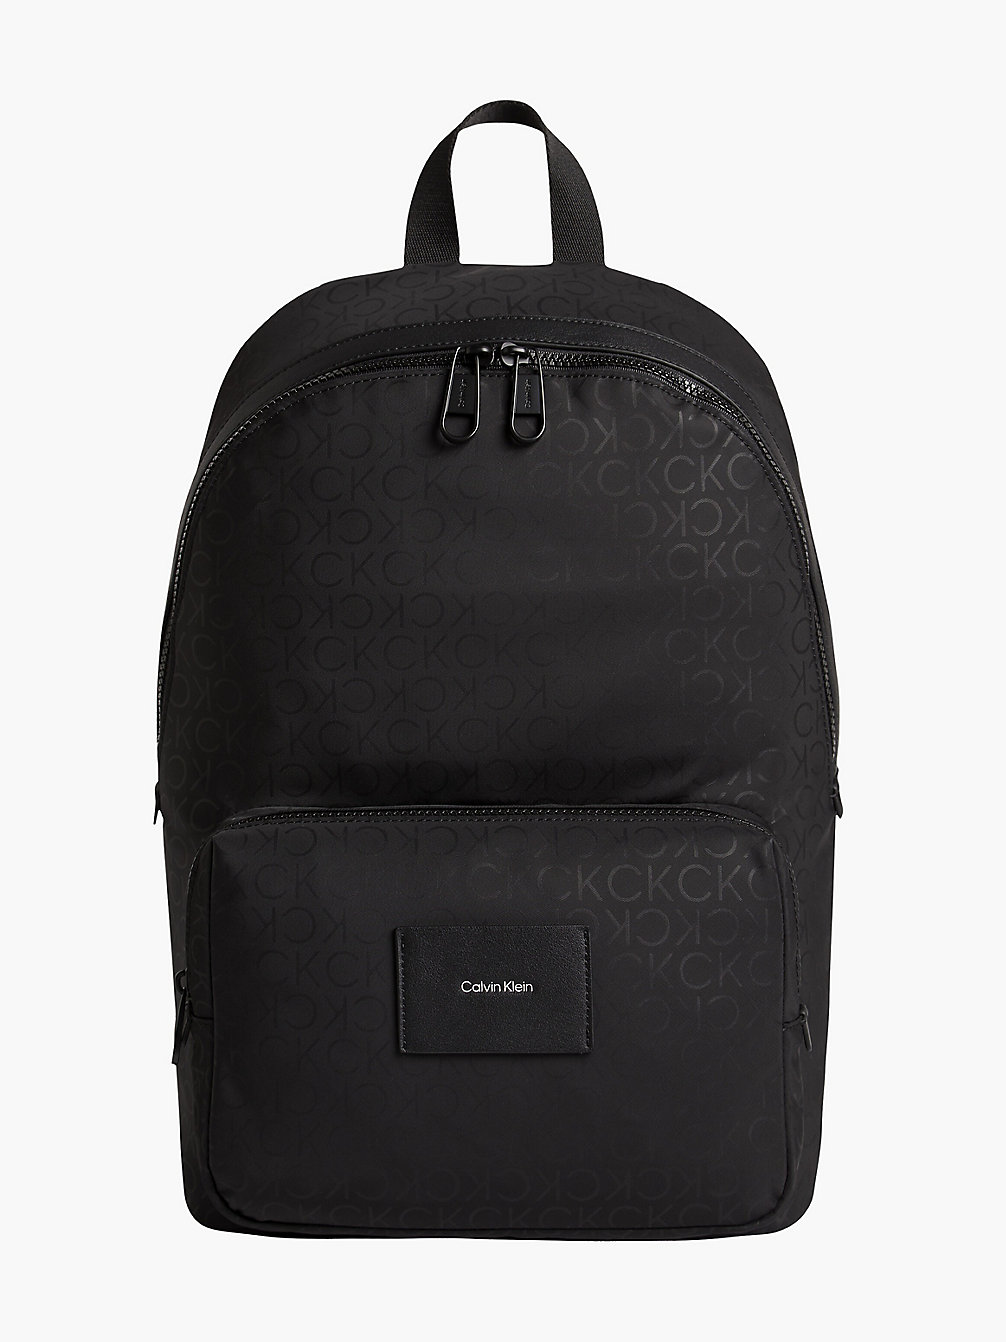 BLACK MONO Recycled Polyester Round Backpack undefined men Calvin Klein